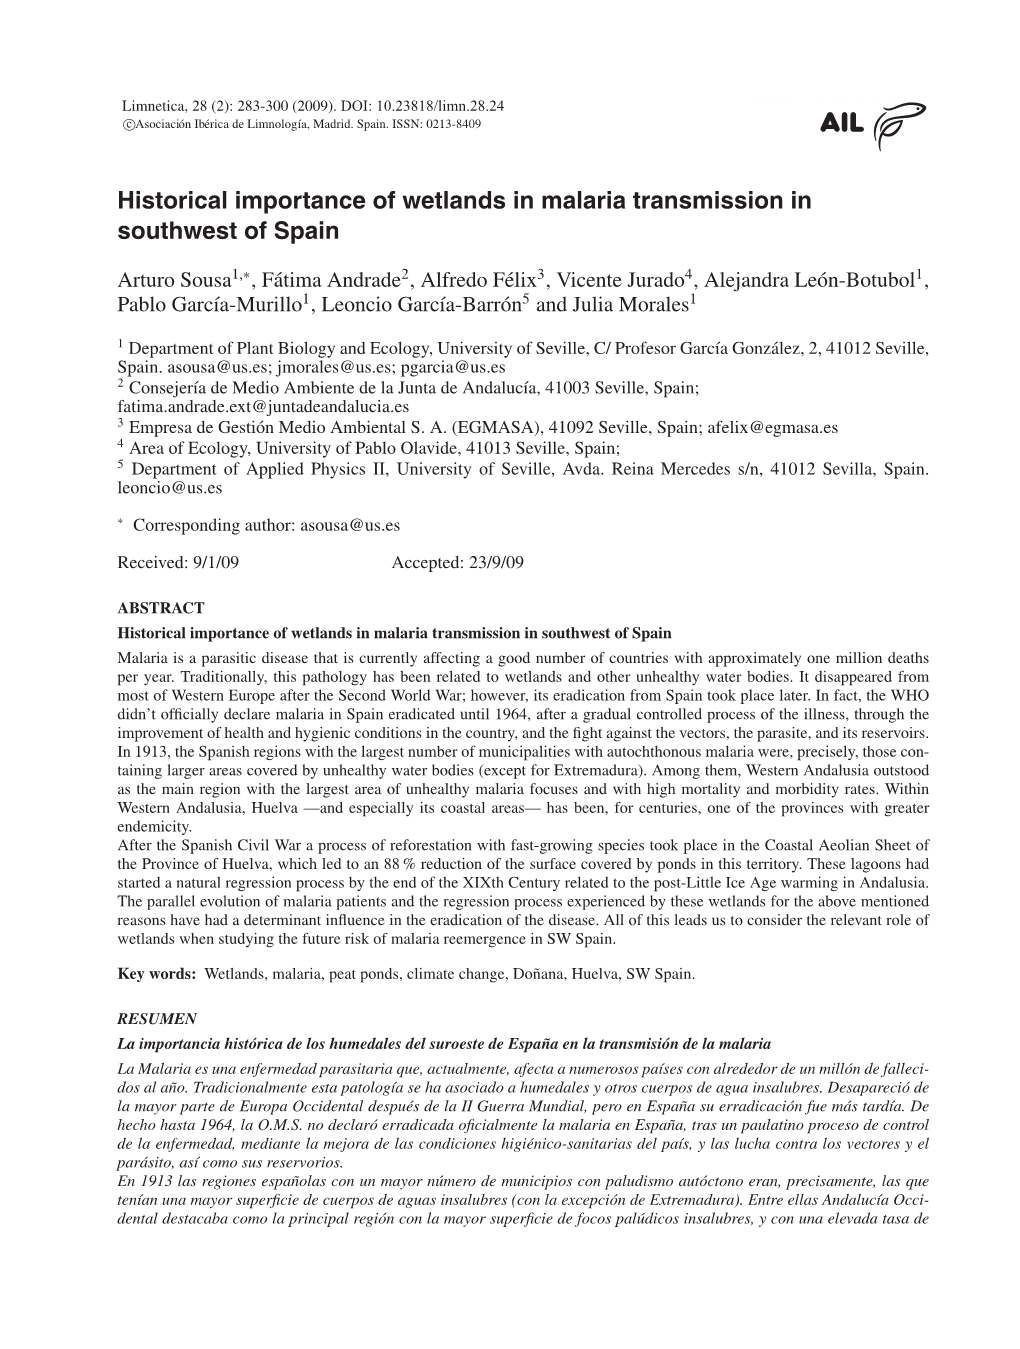 Historical Importance of Wetlands in Malaria Transmission Spain